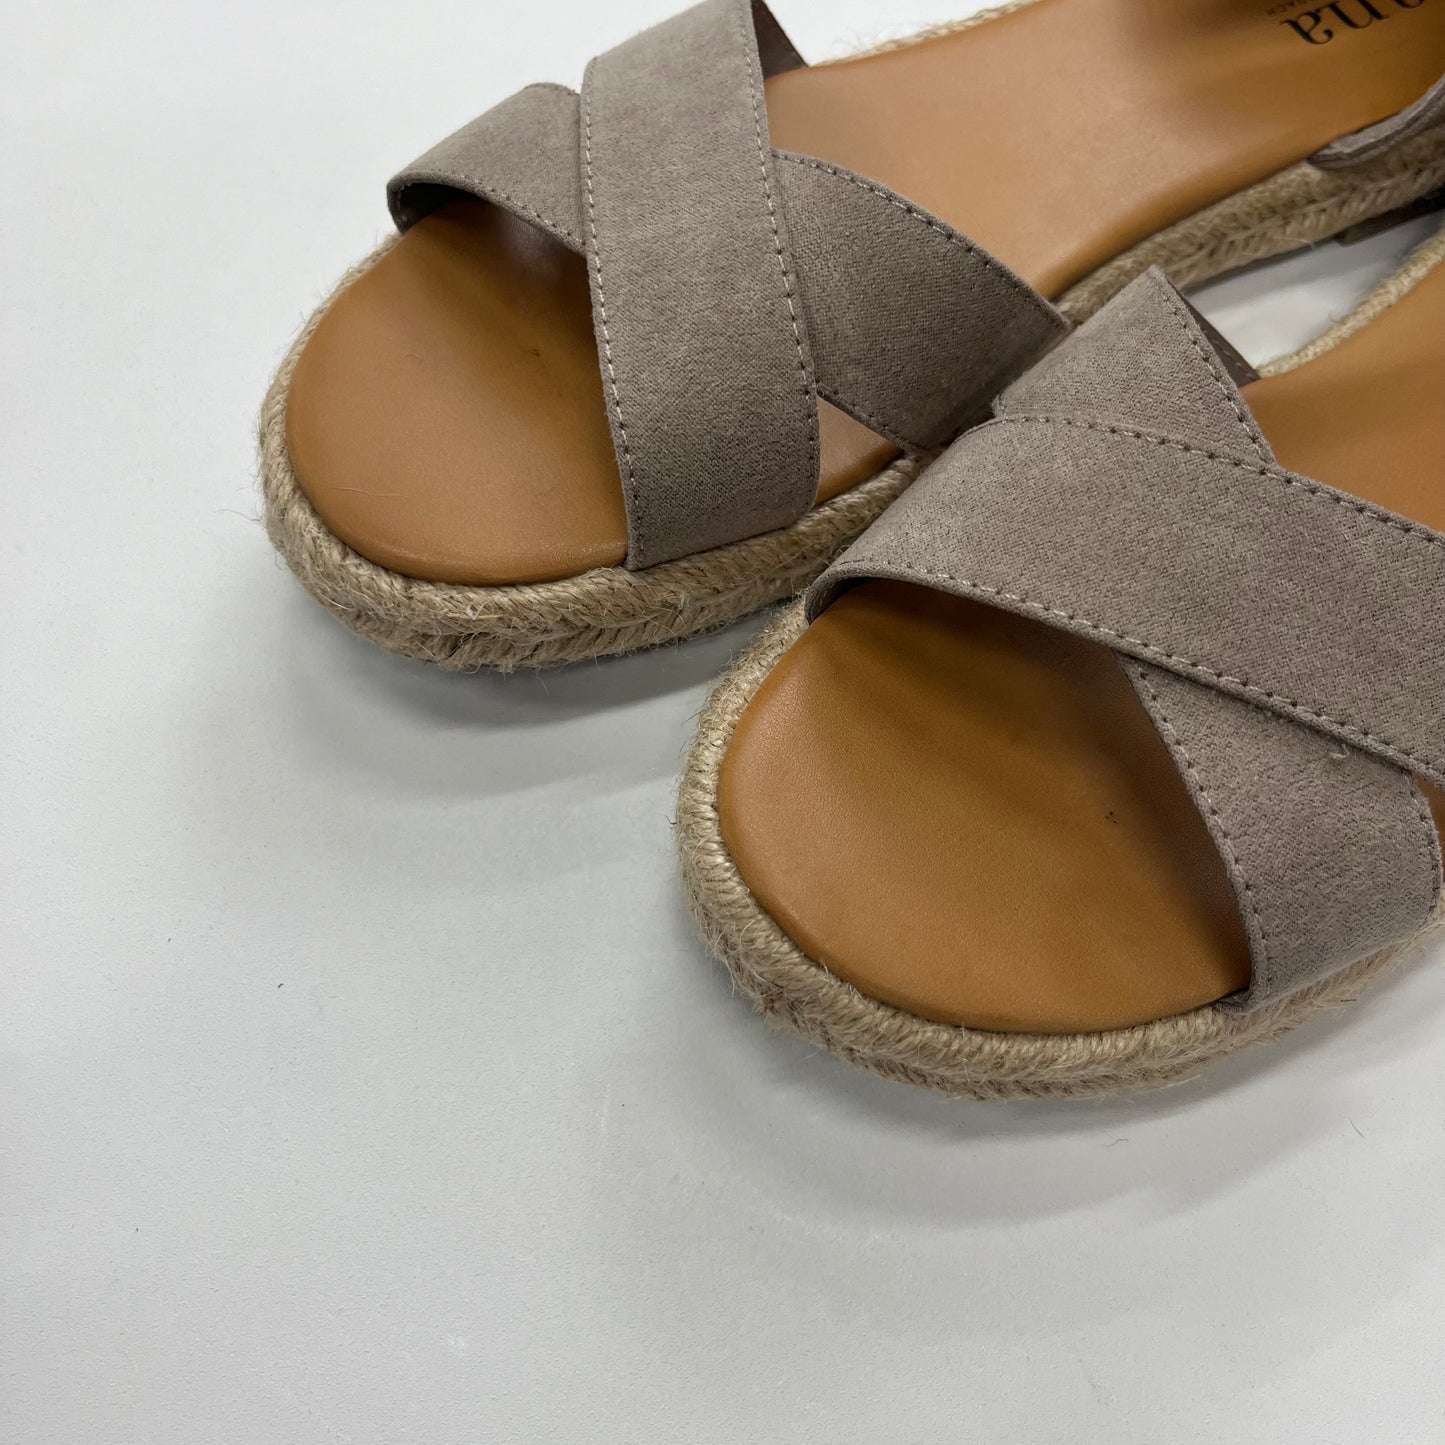 Taupe Sandals Flats Ana, Size 8